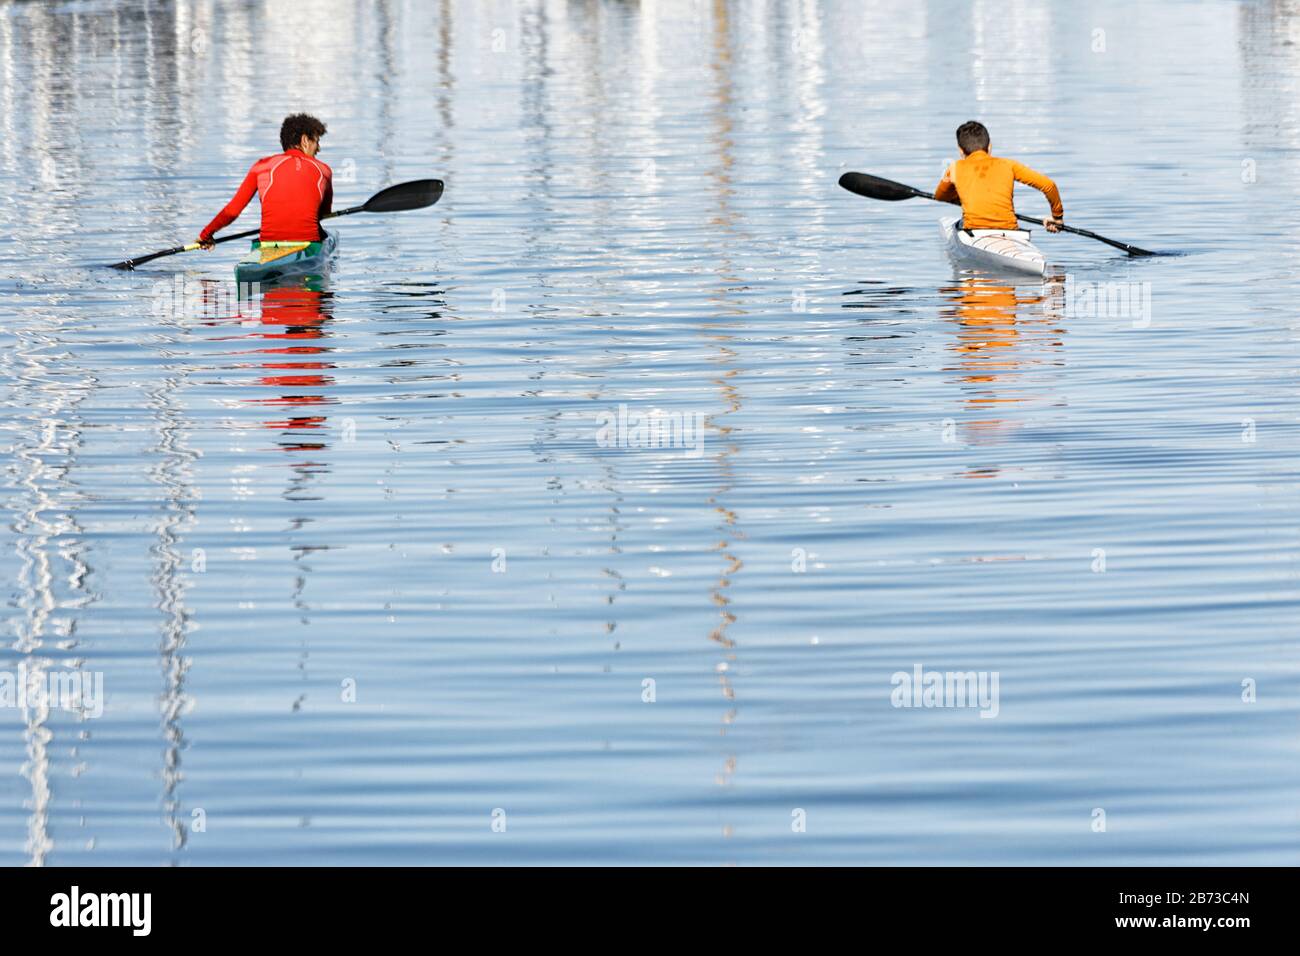 Red and yellow canoe rowers on silvery waters Stock Photo